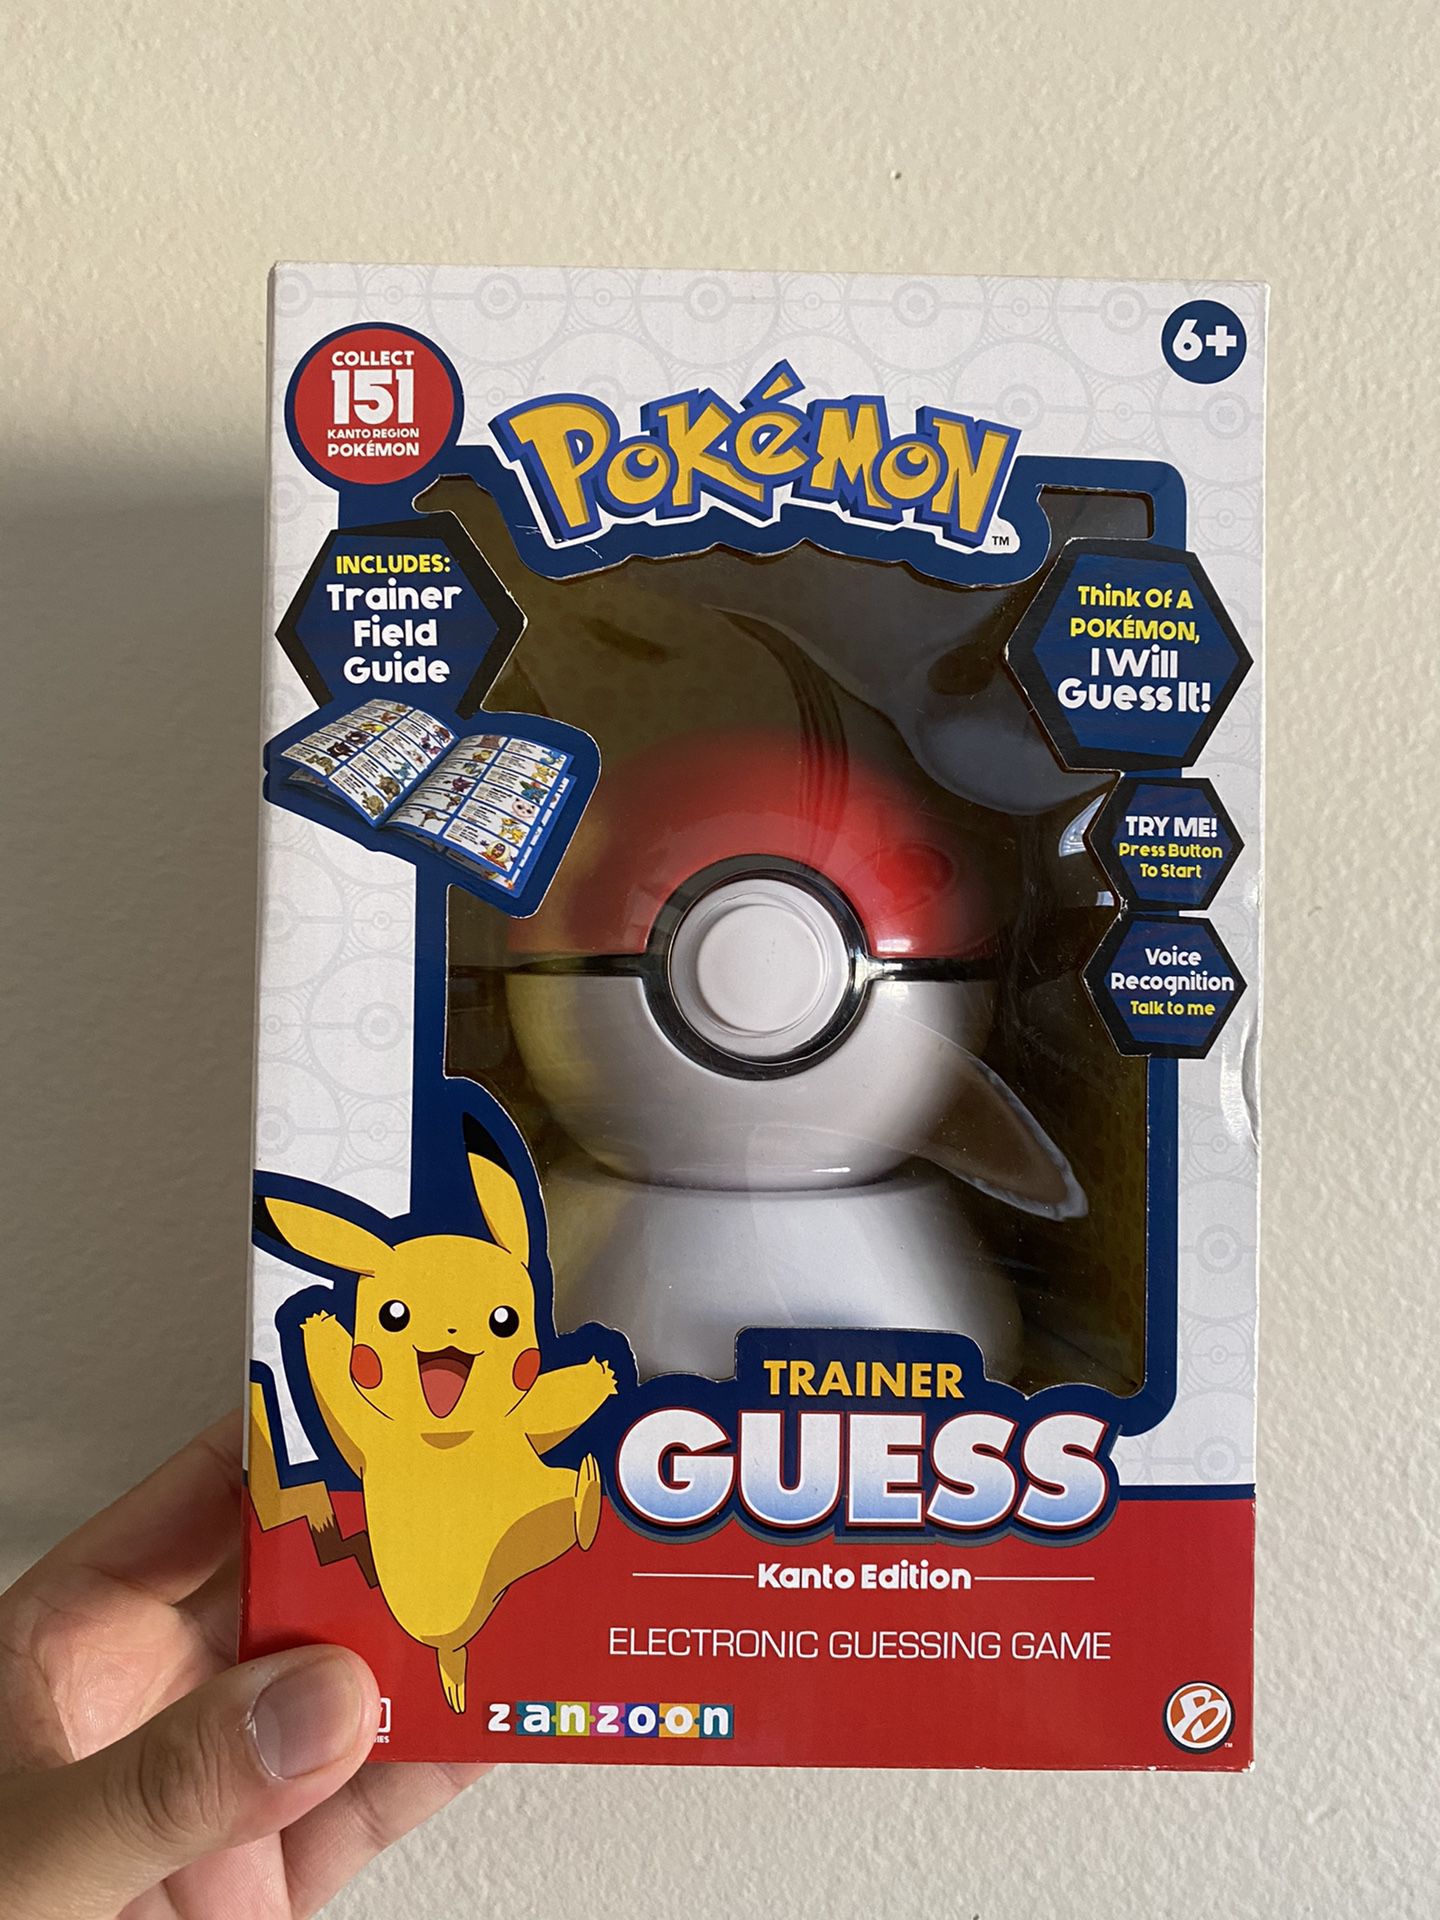 Pokemon Trainer Guess Electronic